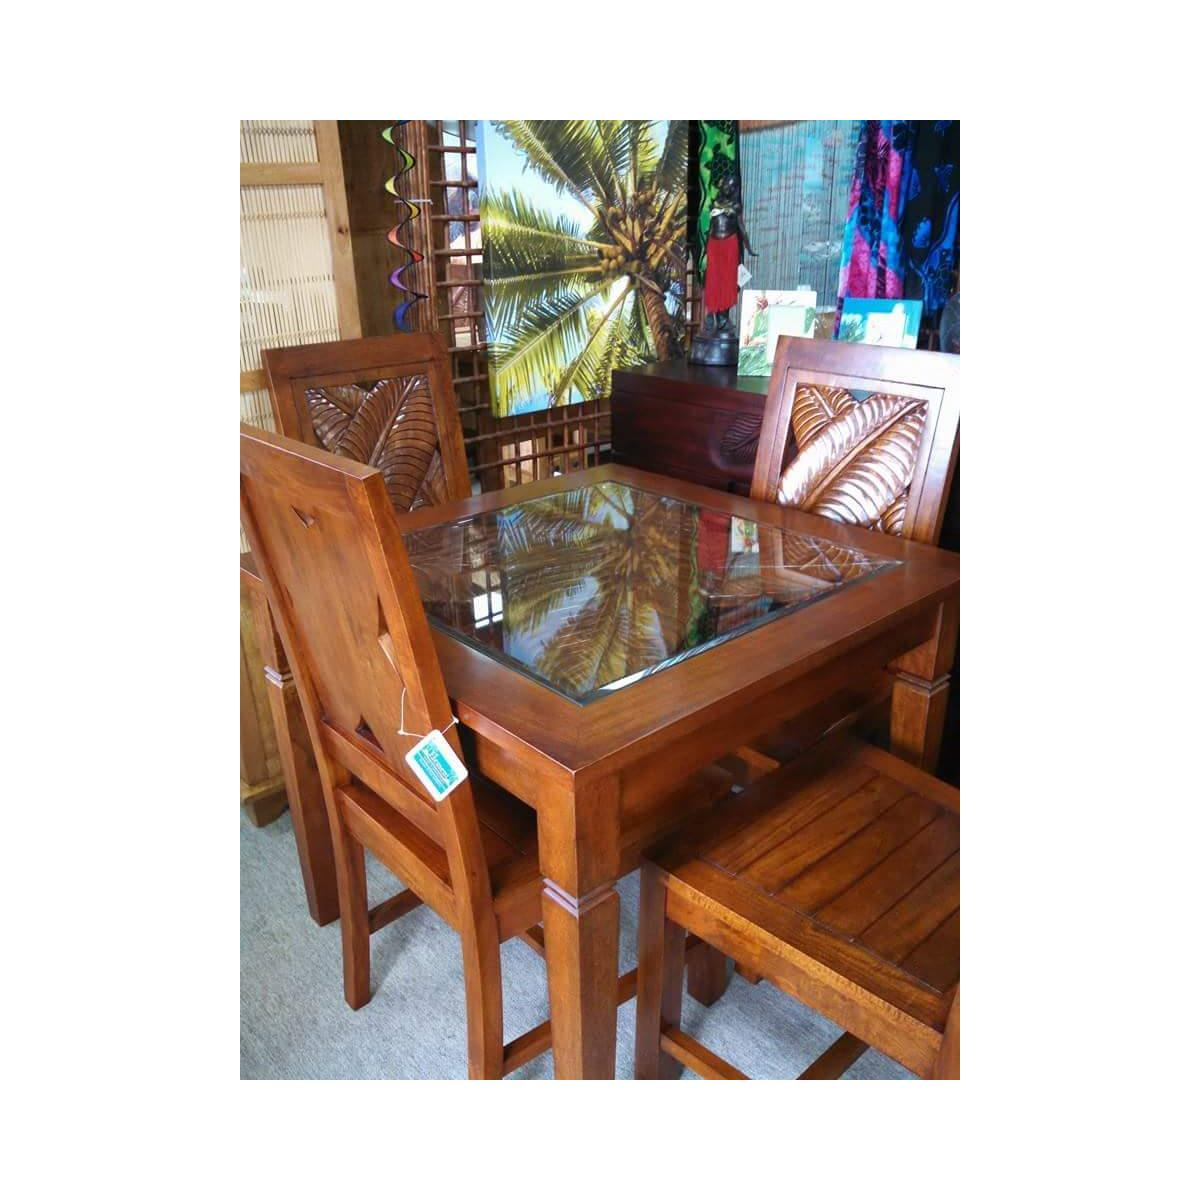 Bali Carved Dining Table At Elementfinefurniture Hand within sizing 1200 X 1200